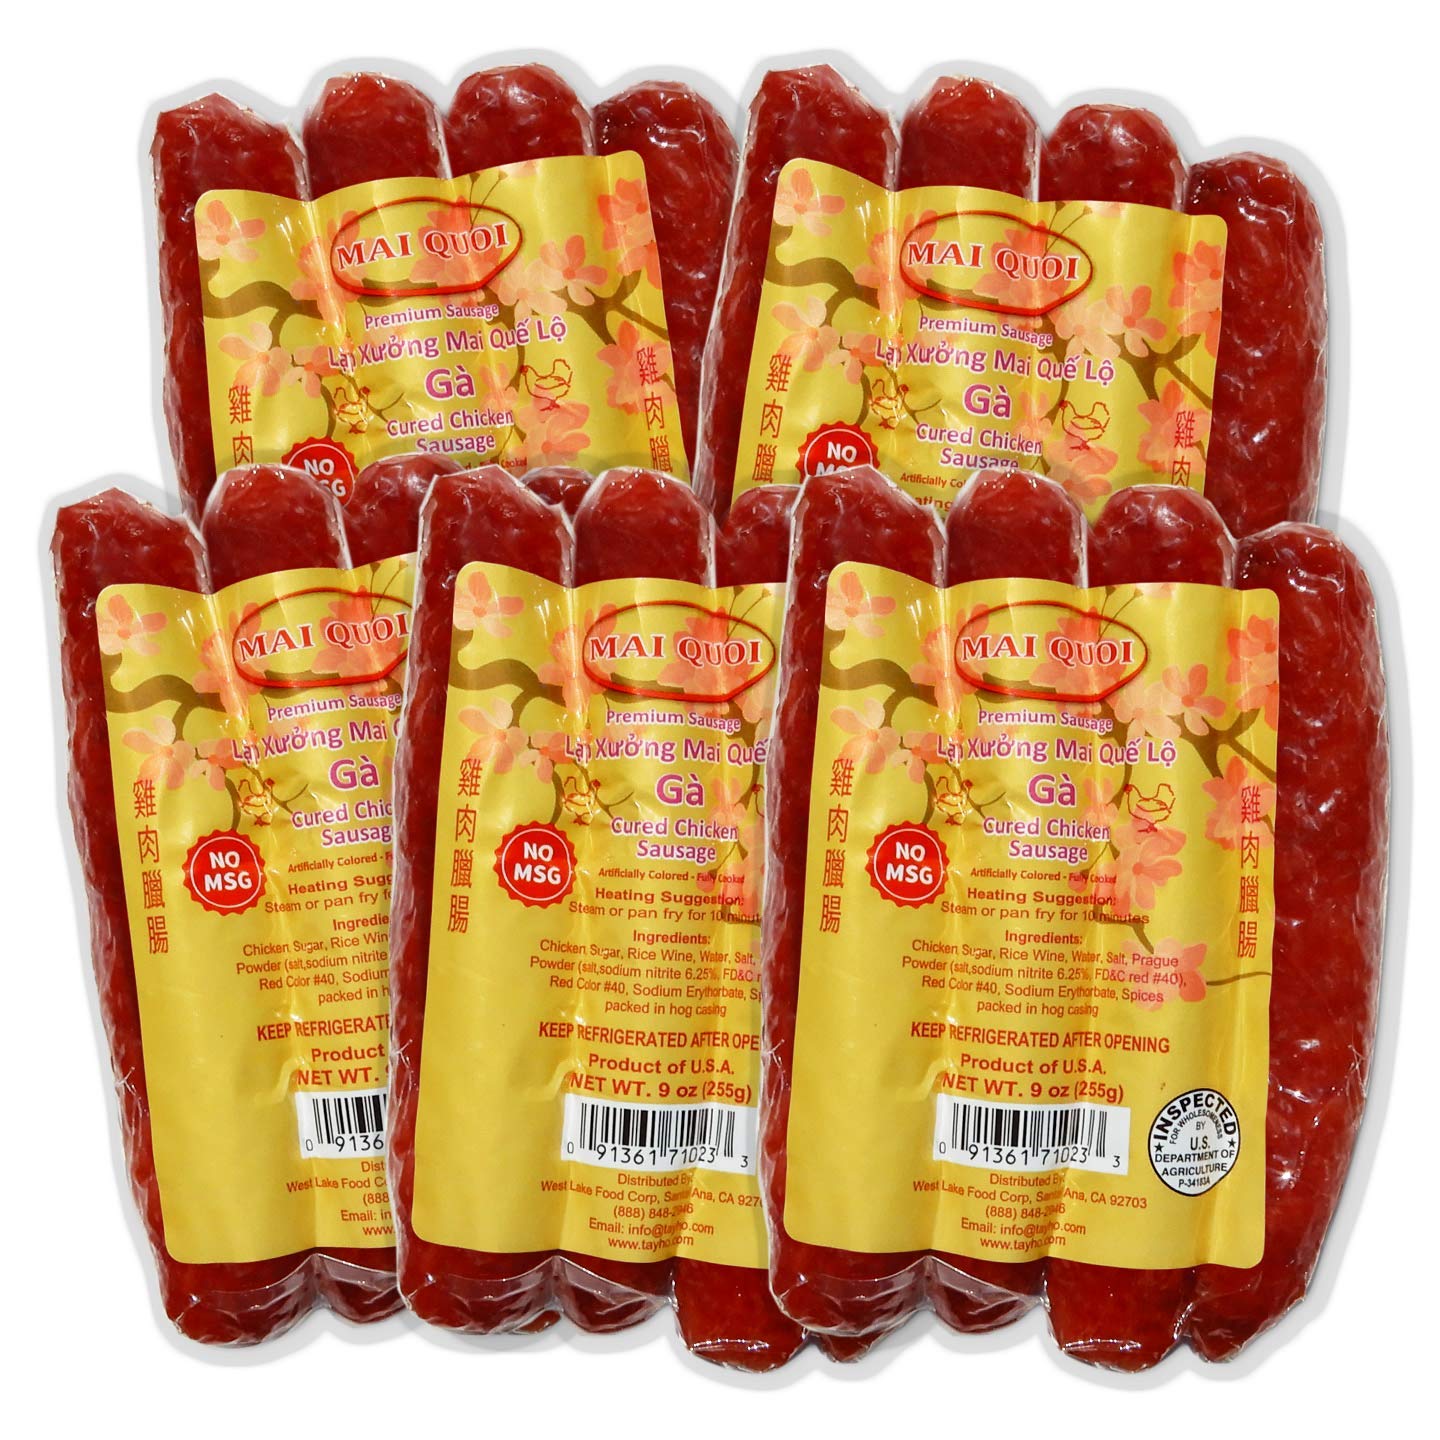 Gourmet Chicken CURED SAUSAGE LAP XUONG GA (No MSG) Made in the USA